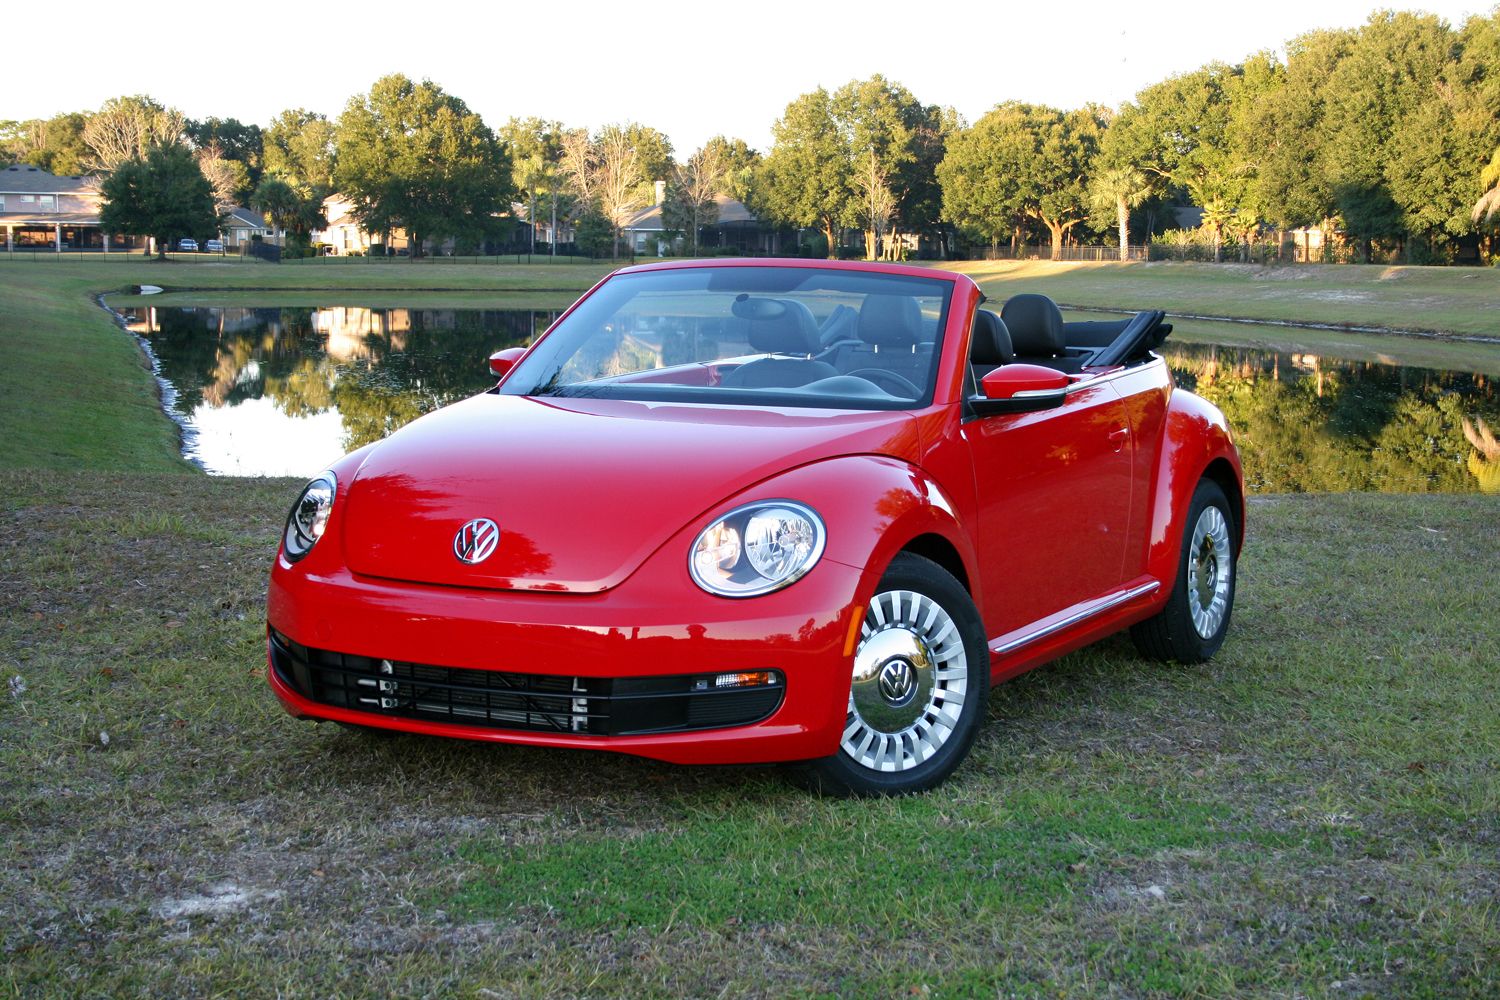  Mark McNabb spent some time with the 2015 Beetle Convertible 1.8T; check out his review at TopSpeed.com to find out if he still has his Chuck Norris beard after a week with Beelte, or if he swapped it out for a 